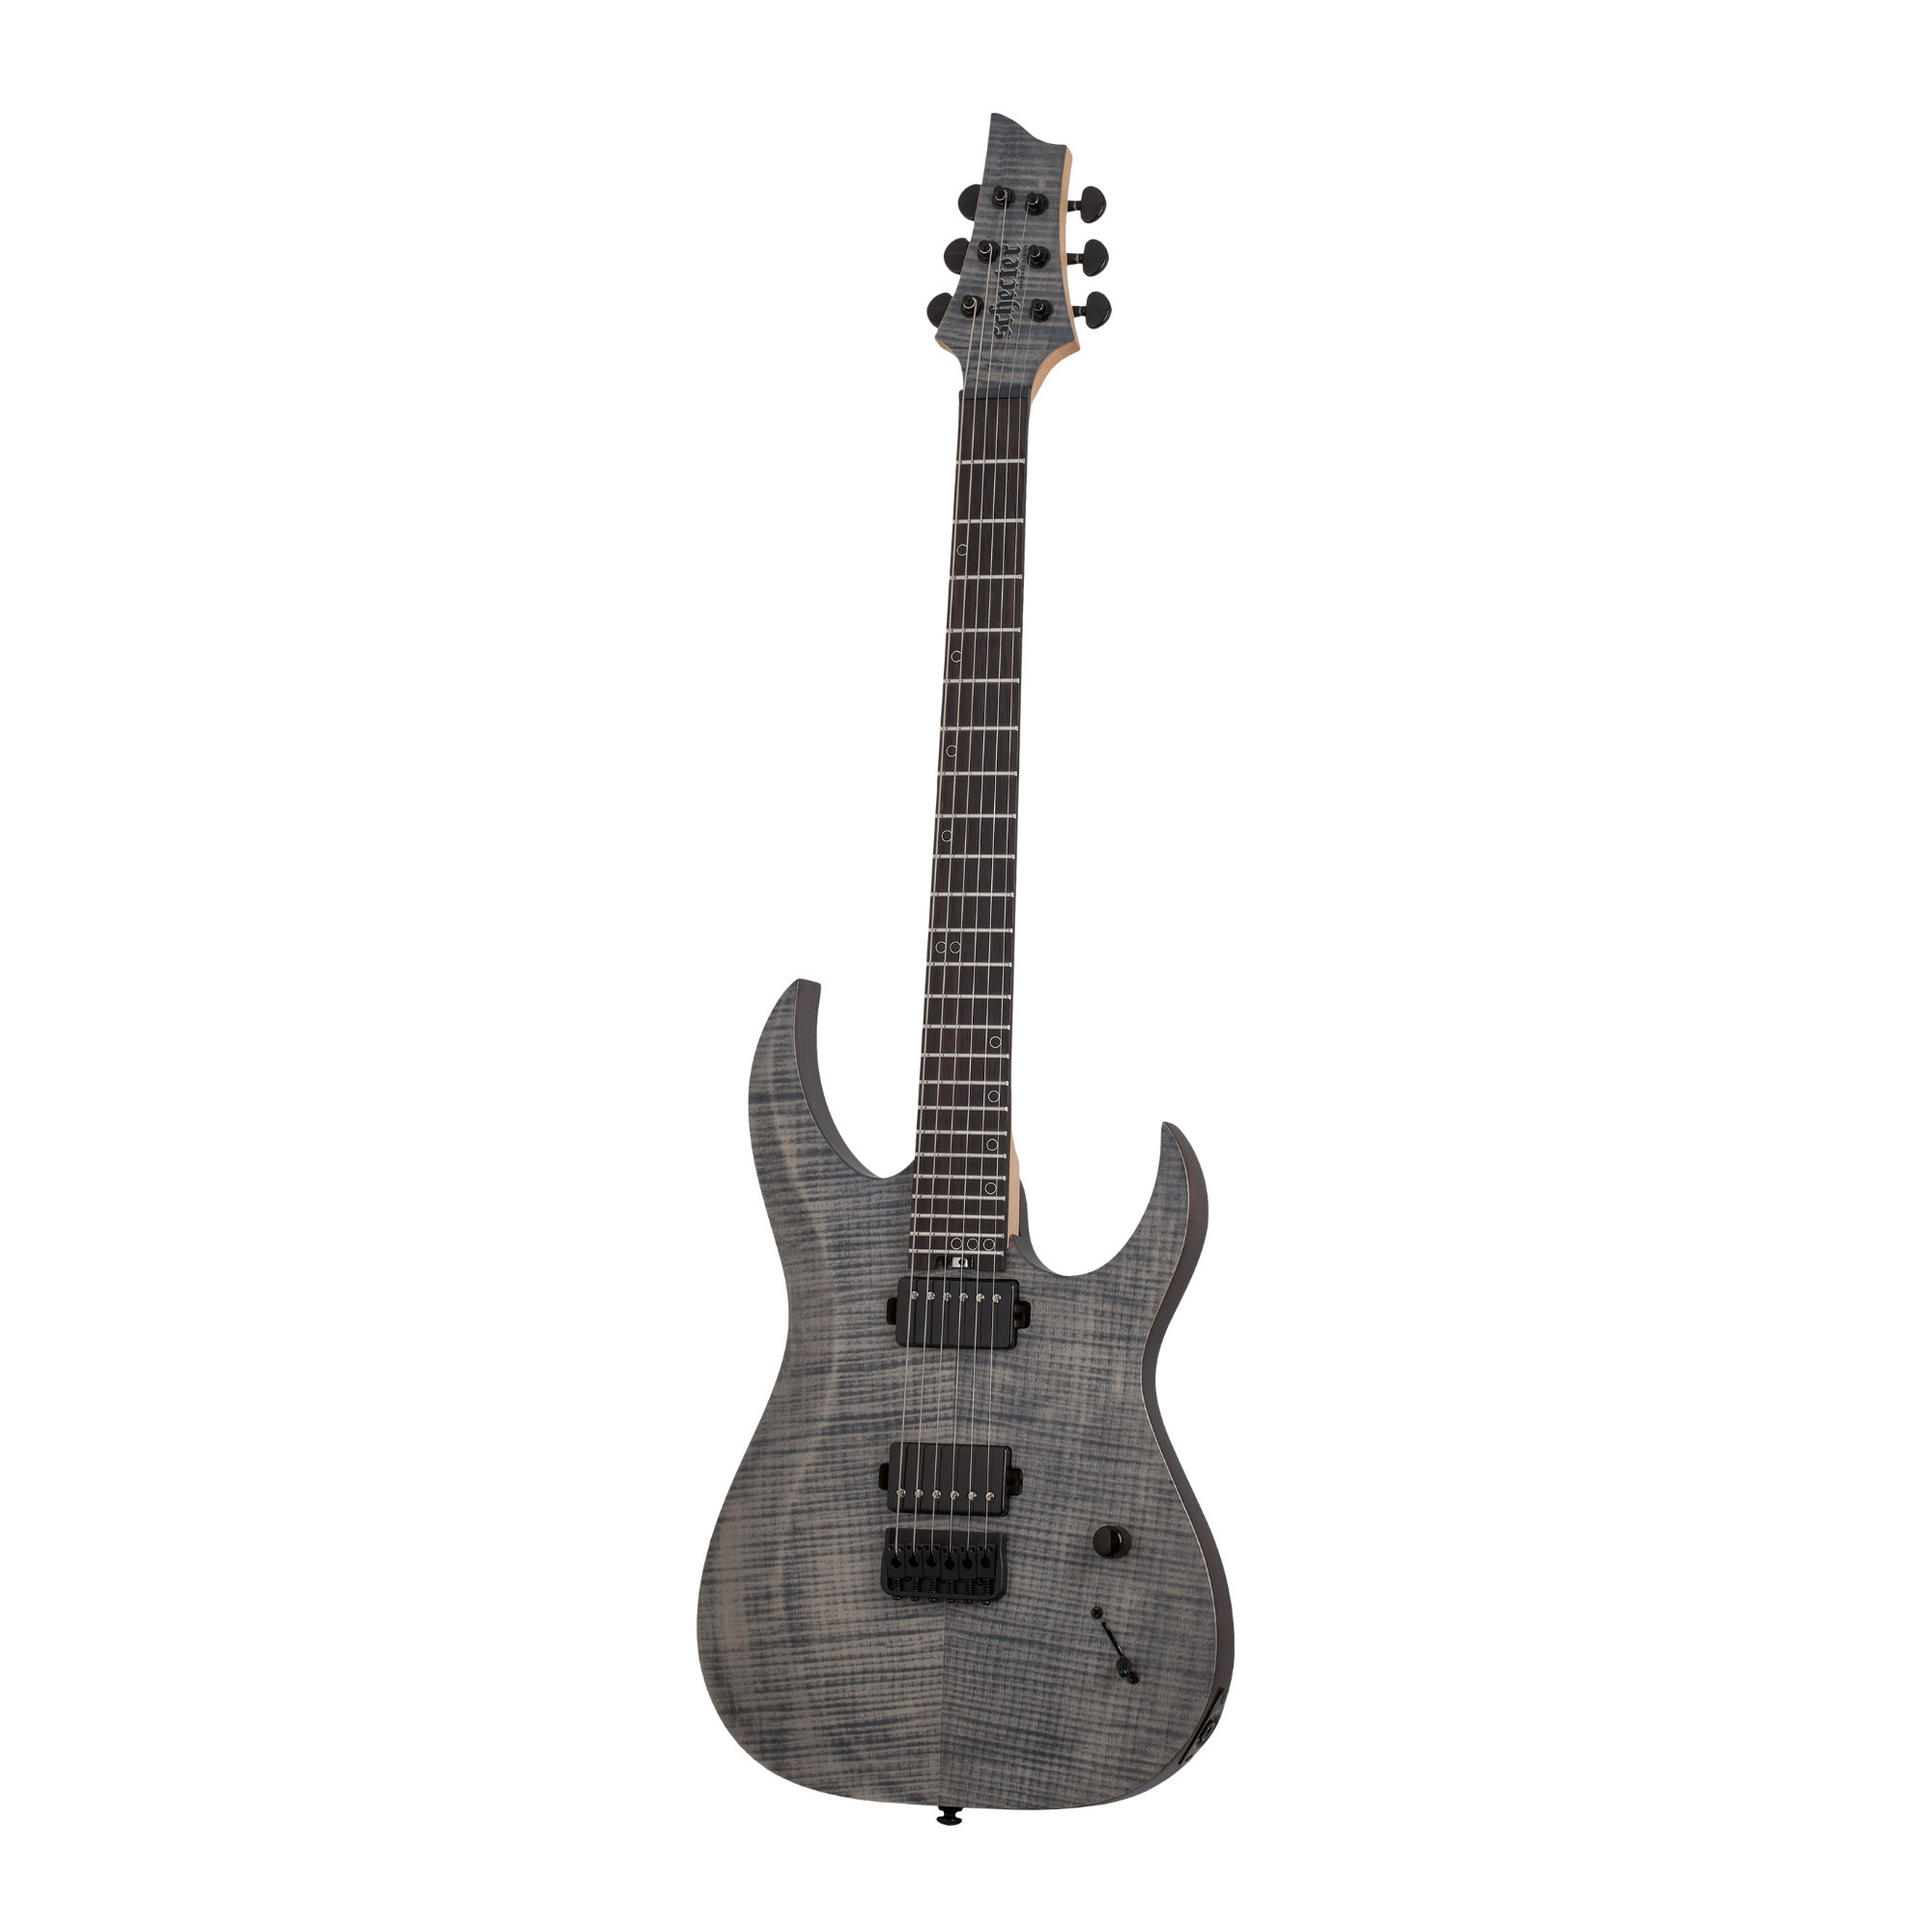 Schecter Sunset-6 Extreme 6-String Electric Guitar with Ebony Fretboard (Right-Handed, Gray Ghost) -  SGR-2570